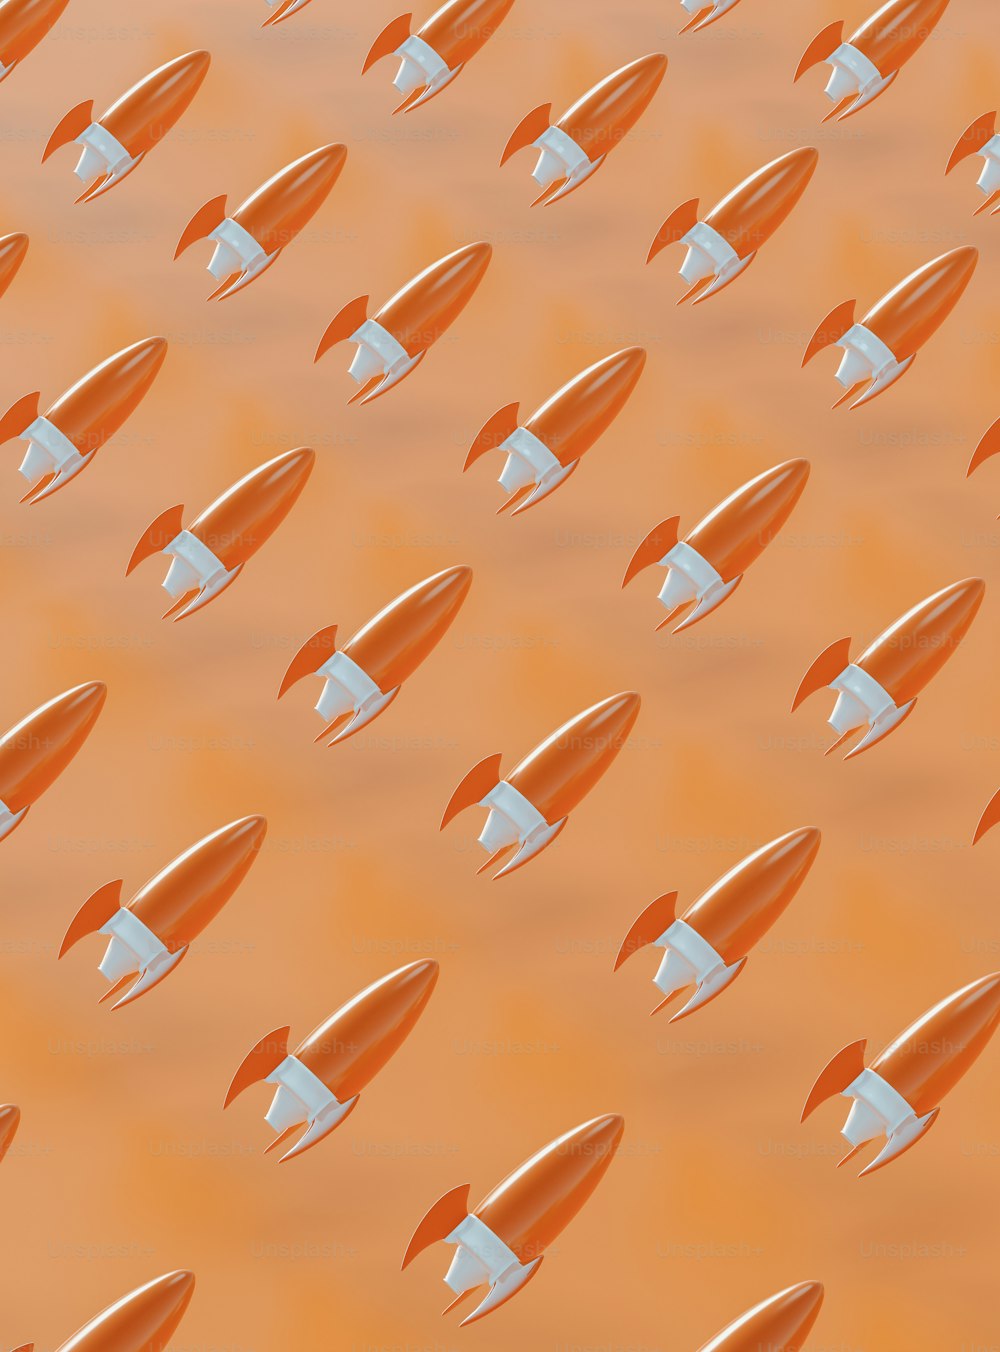 a group of orange and white rockets flying through the air